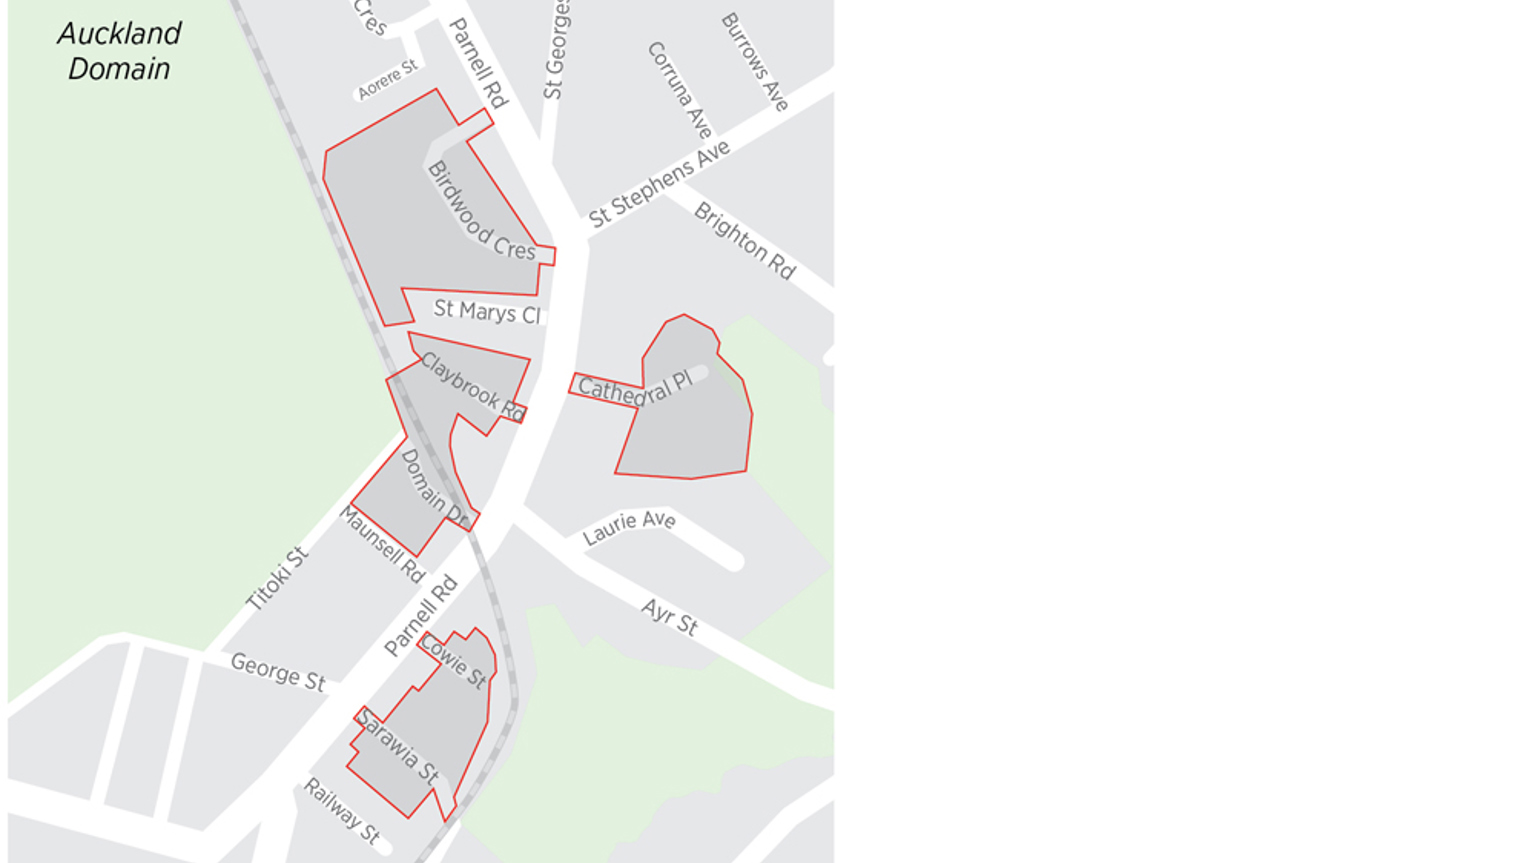 Map of Parnell South with the resident parking zone boundaries indicated with red lines.